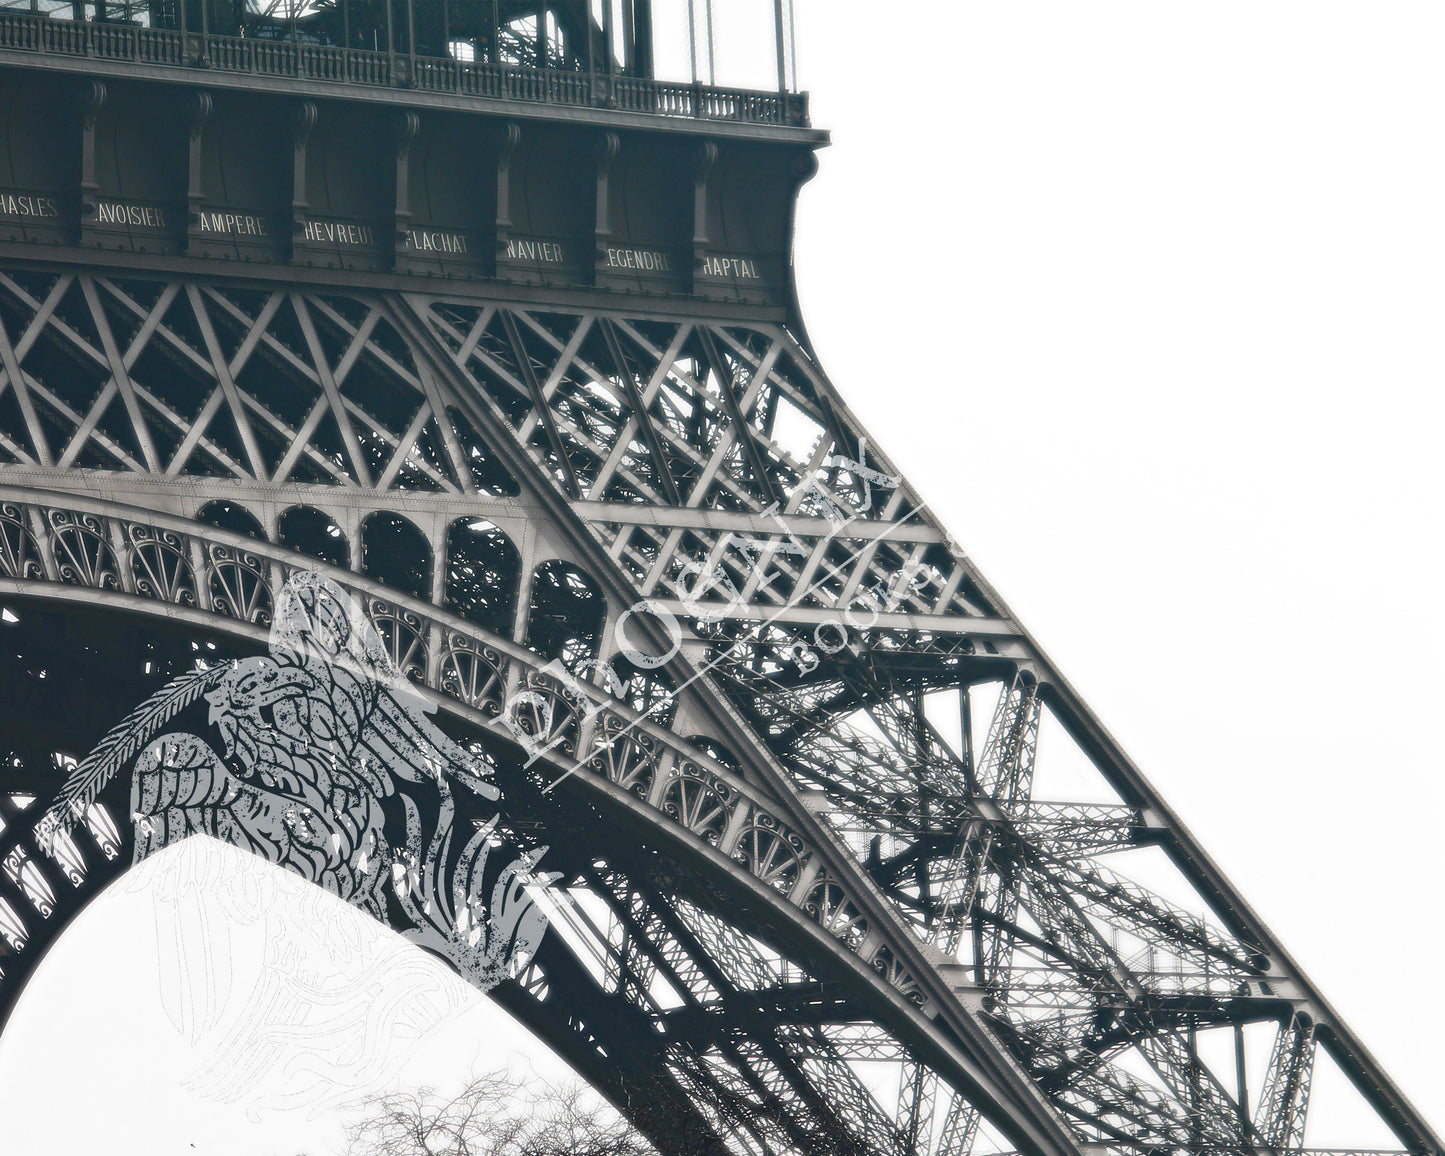 Travel photography. Gifts for history lovers and travelers. Black and white photograph of the Eiffel Tower in Paris, France. Engineered by Gustave Eiffel, built between 1887-1889 and was the centerpiece of the 1889 World's Fair.